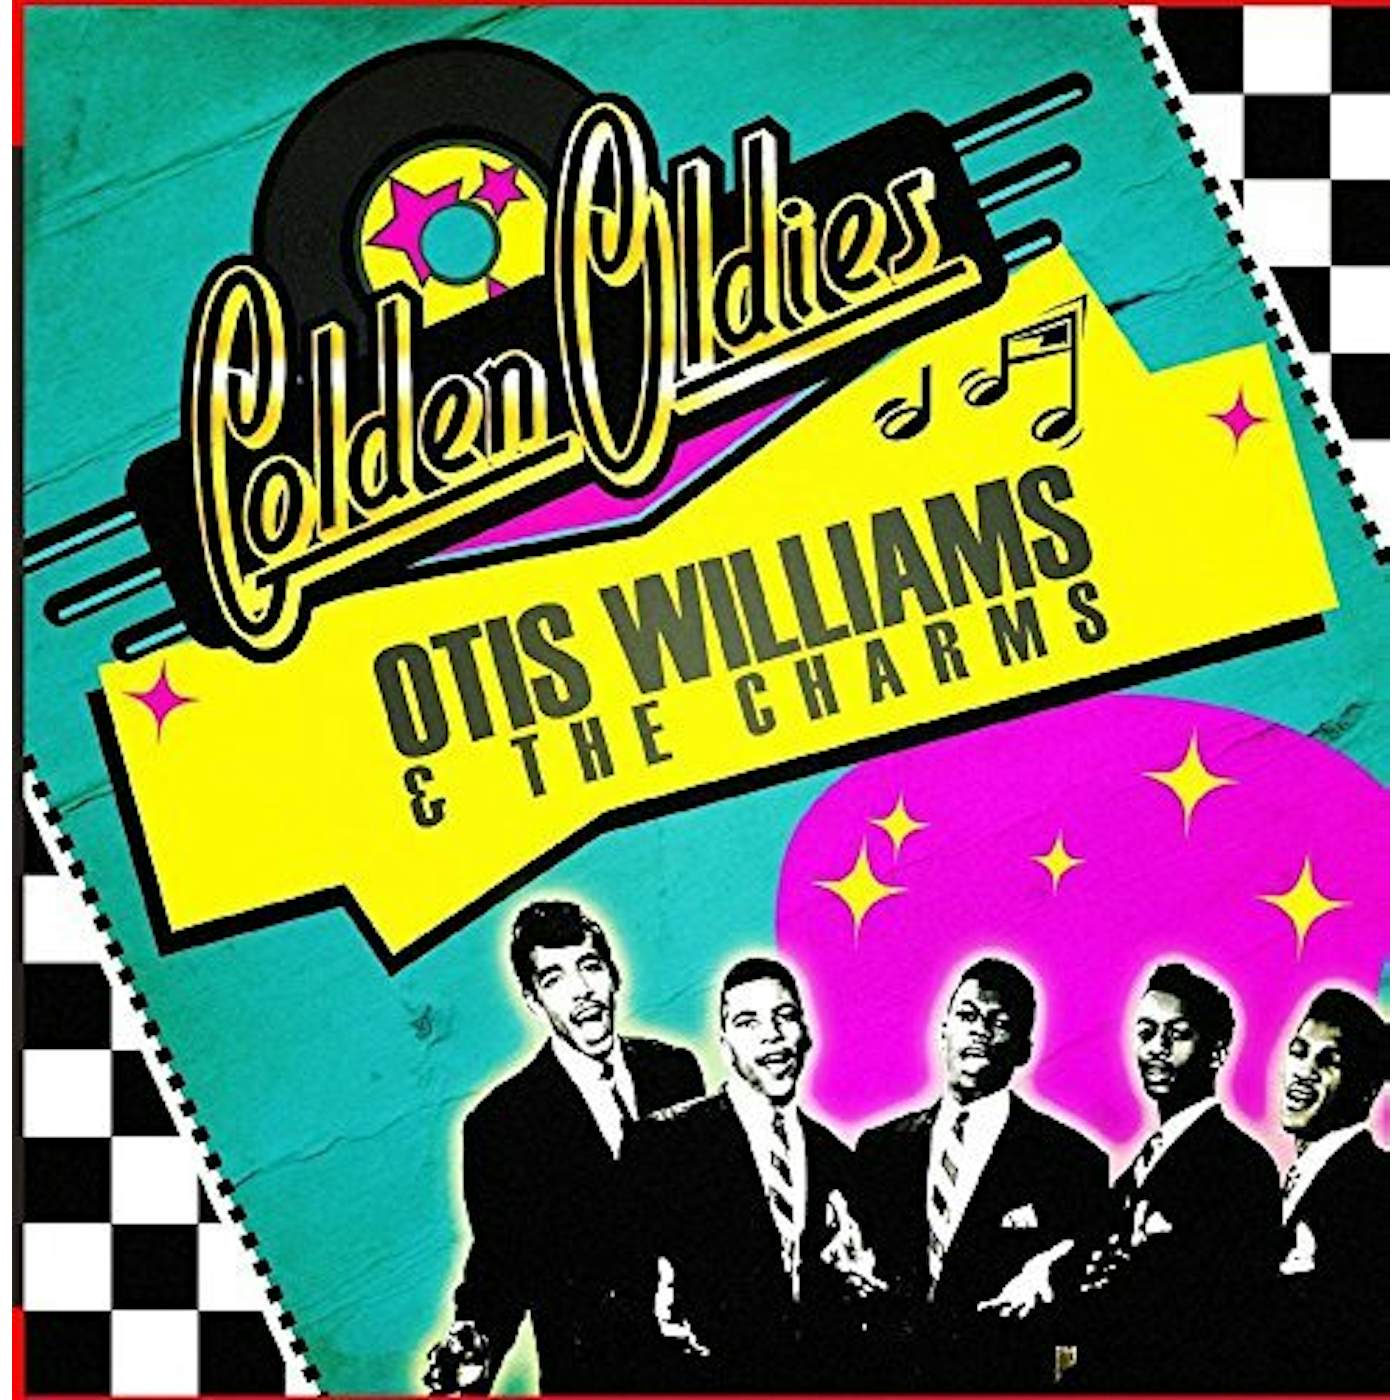 Otis Williams & The Charms GOLDEN OLDIES CD